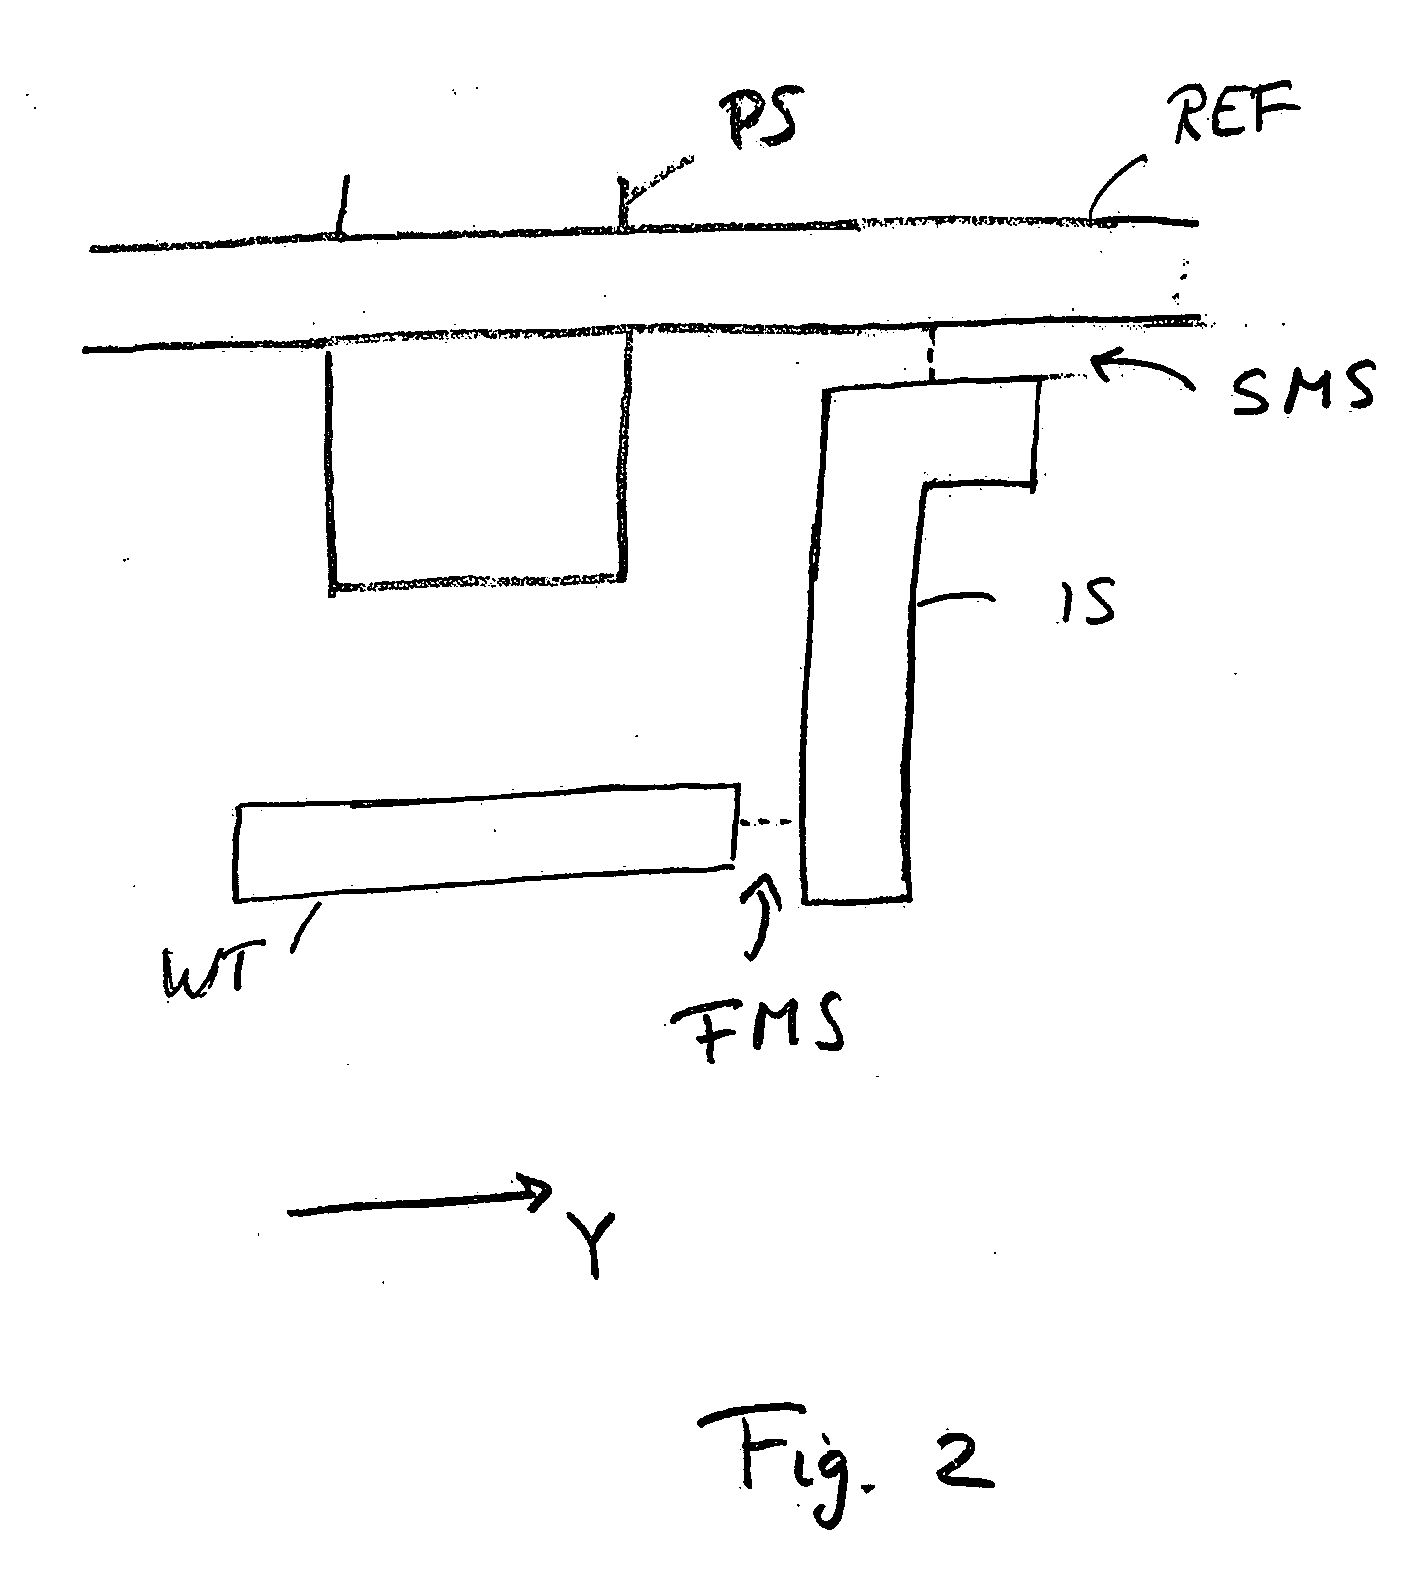 Lithogaphic apparatus and positioning apparatus